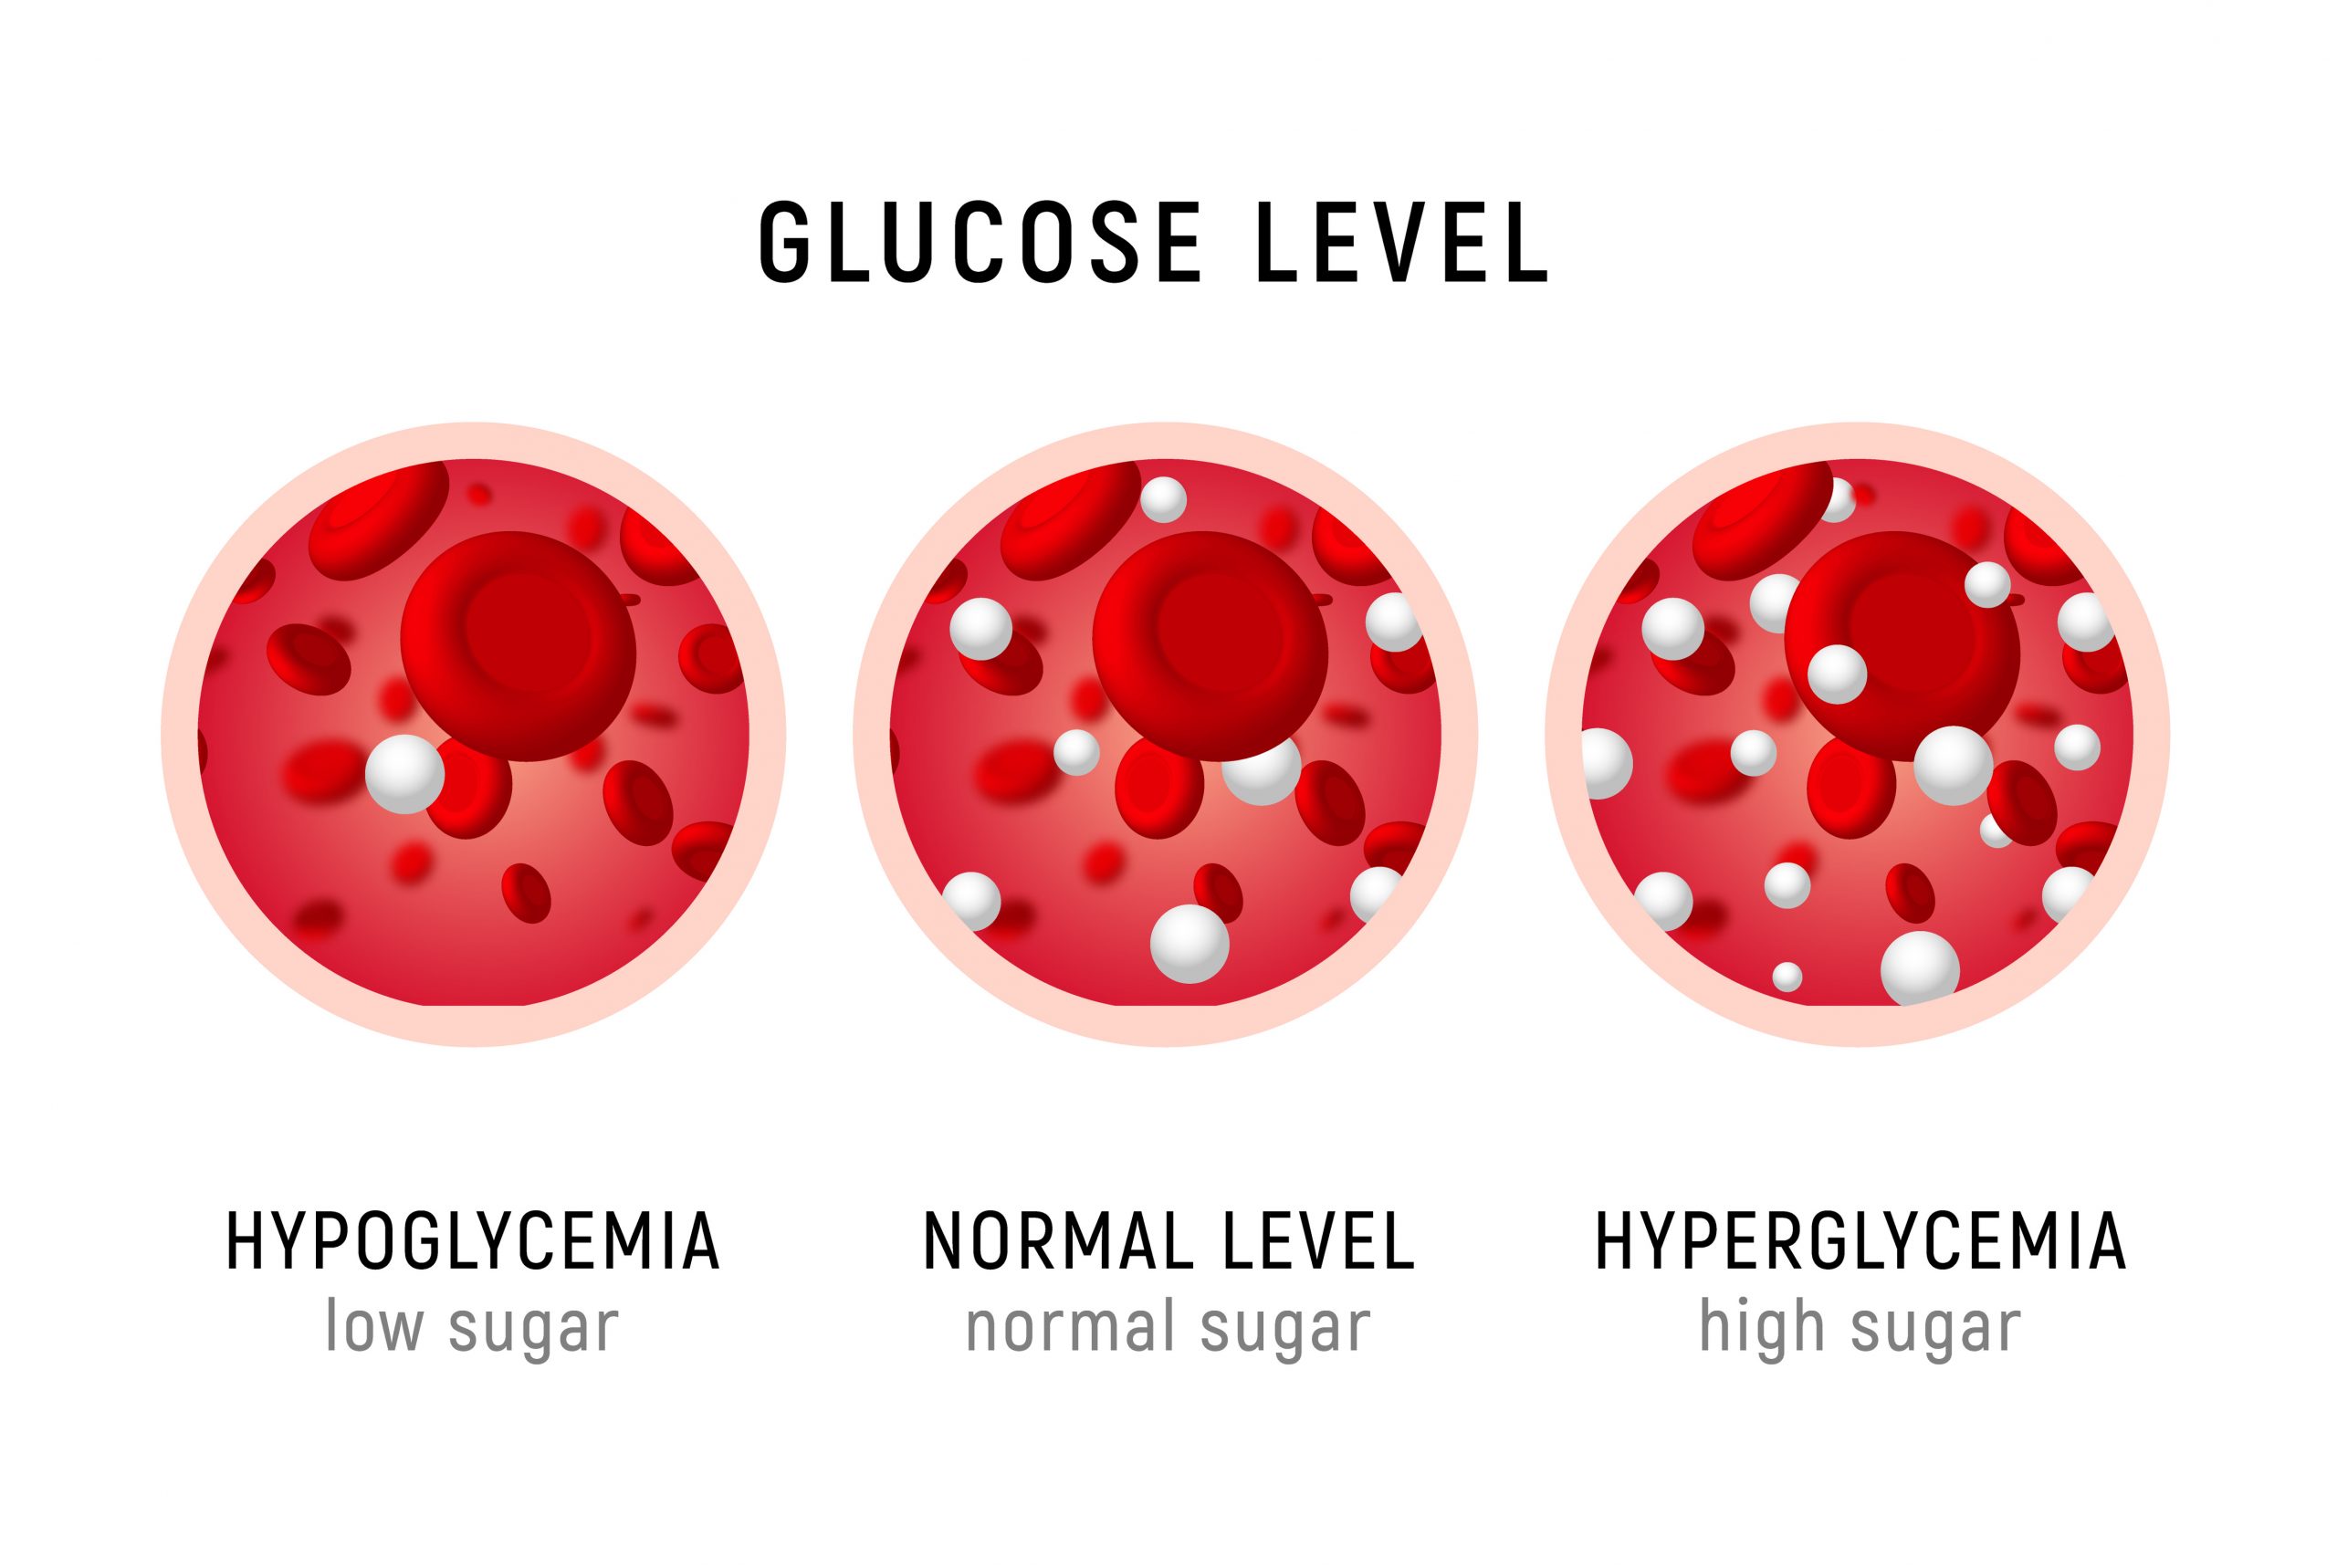 Image showing hypoglycemia (low blood sugar), normal blood sugar, and hyperglycemia (high blood sugar)